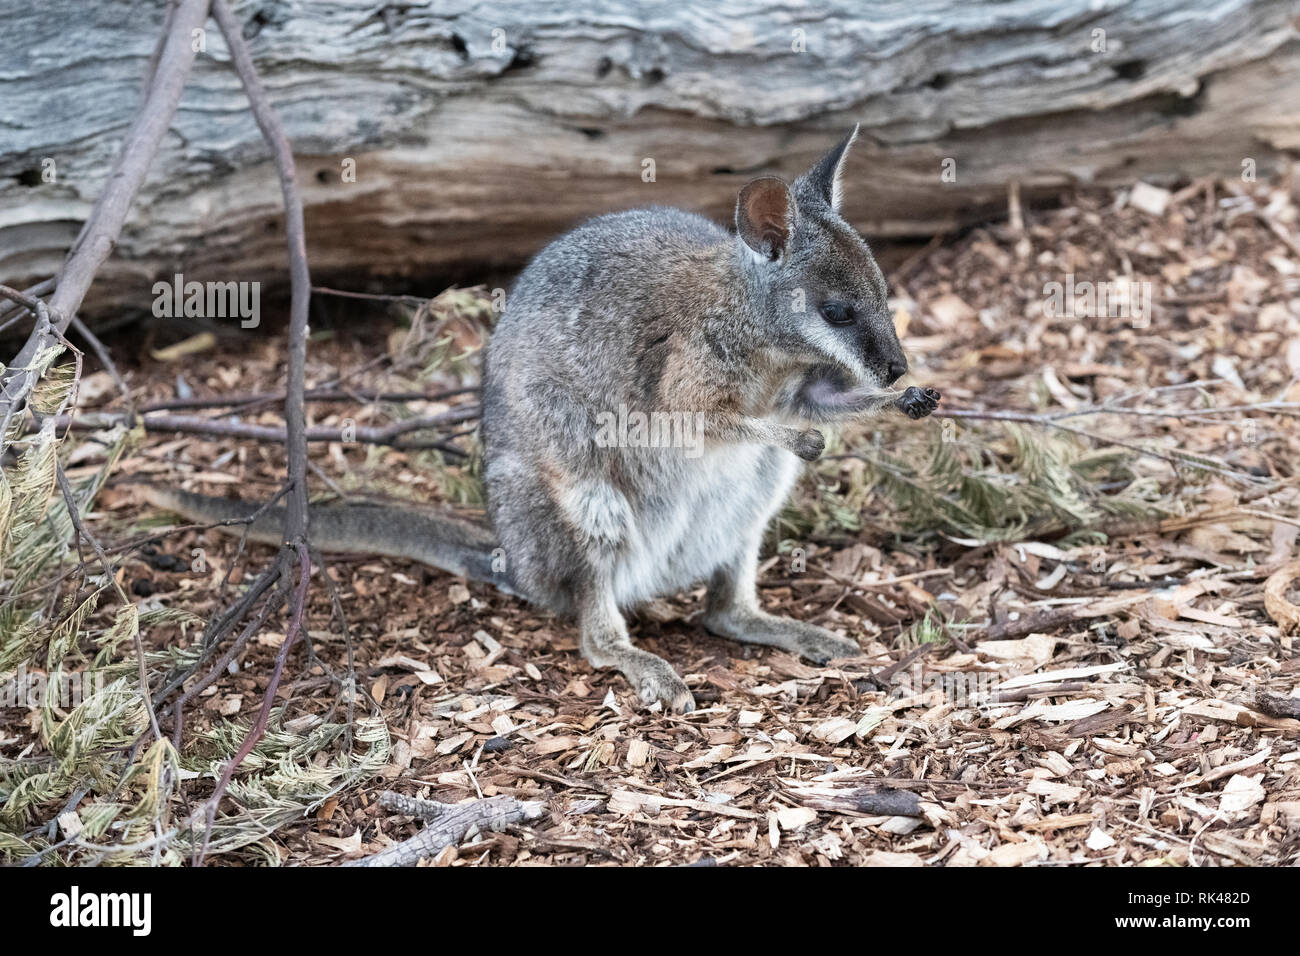 Tammar wallaby, Macropus eugenii, at the Werribee Open Plains Zoo. Stock Photo